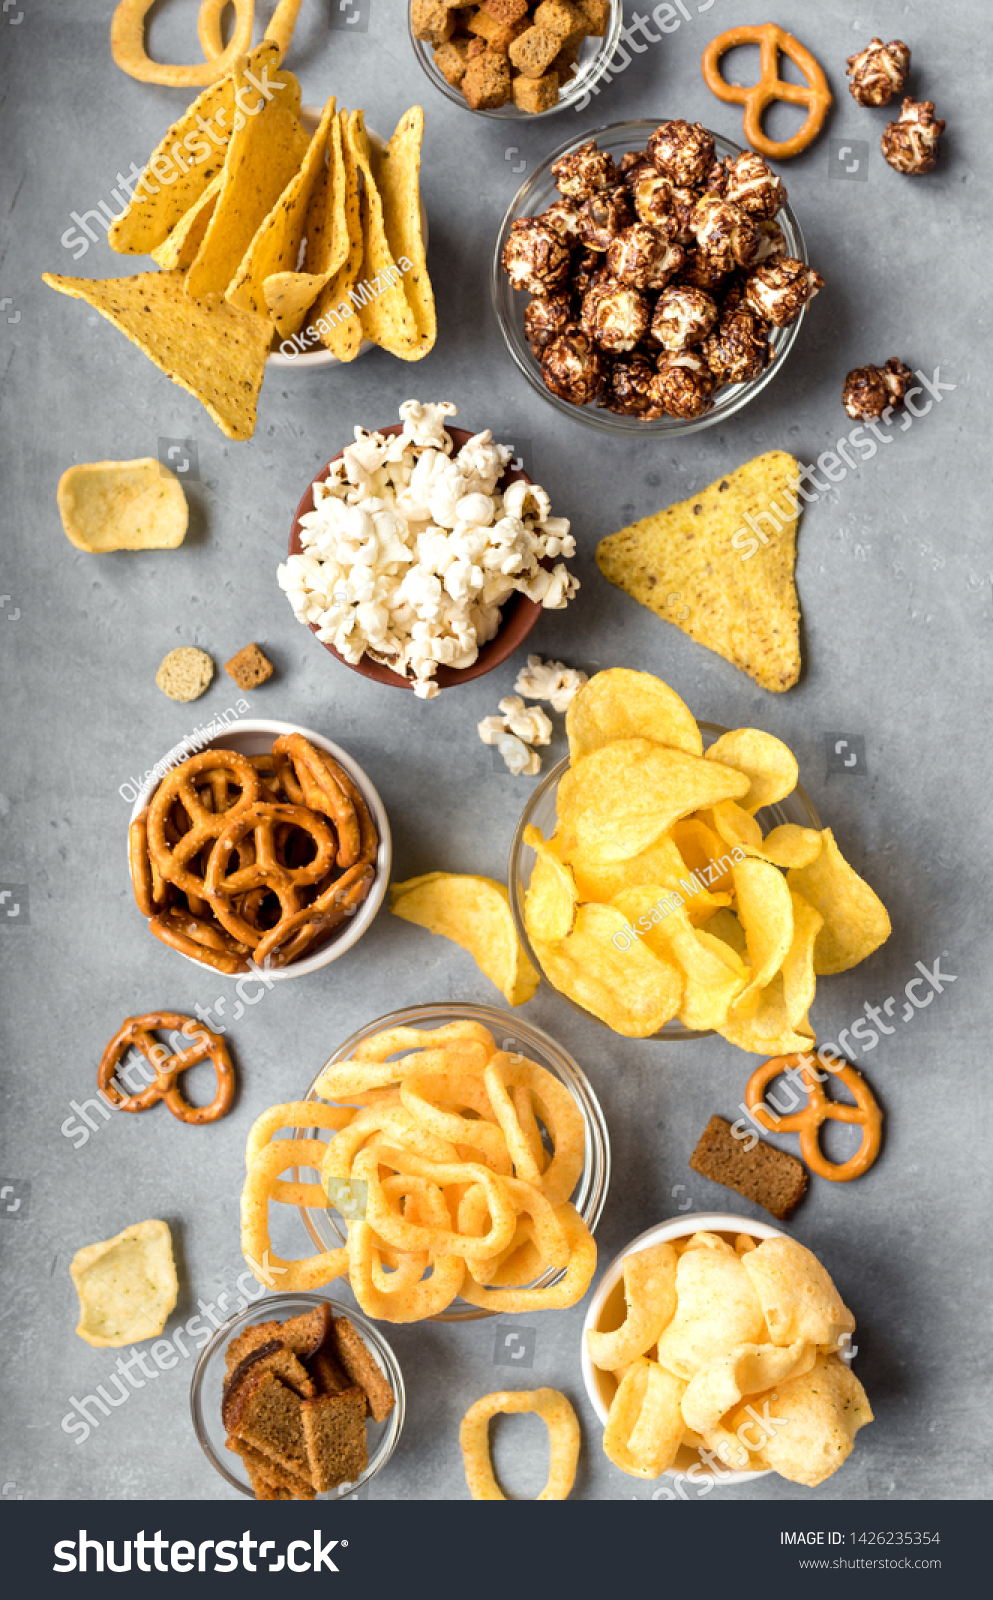 Assortment of Unhealthy Snacks: chips, popcorn, nachos, pretzels, onion rings in bowls, top view, flat lay. Unhealthy eating concept. #1426235354